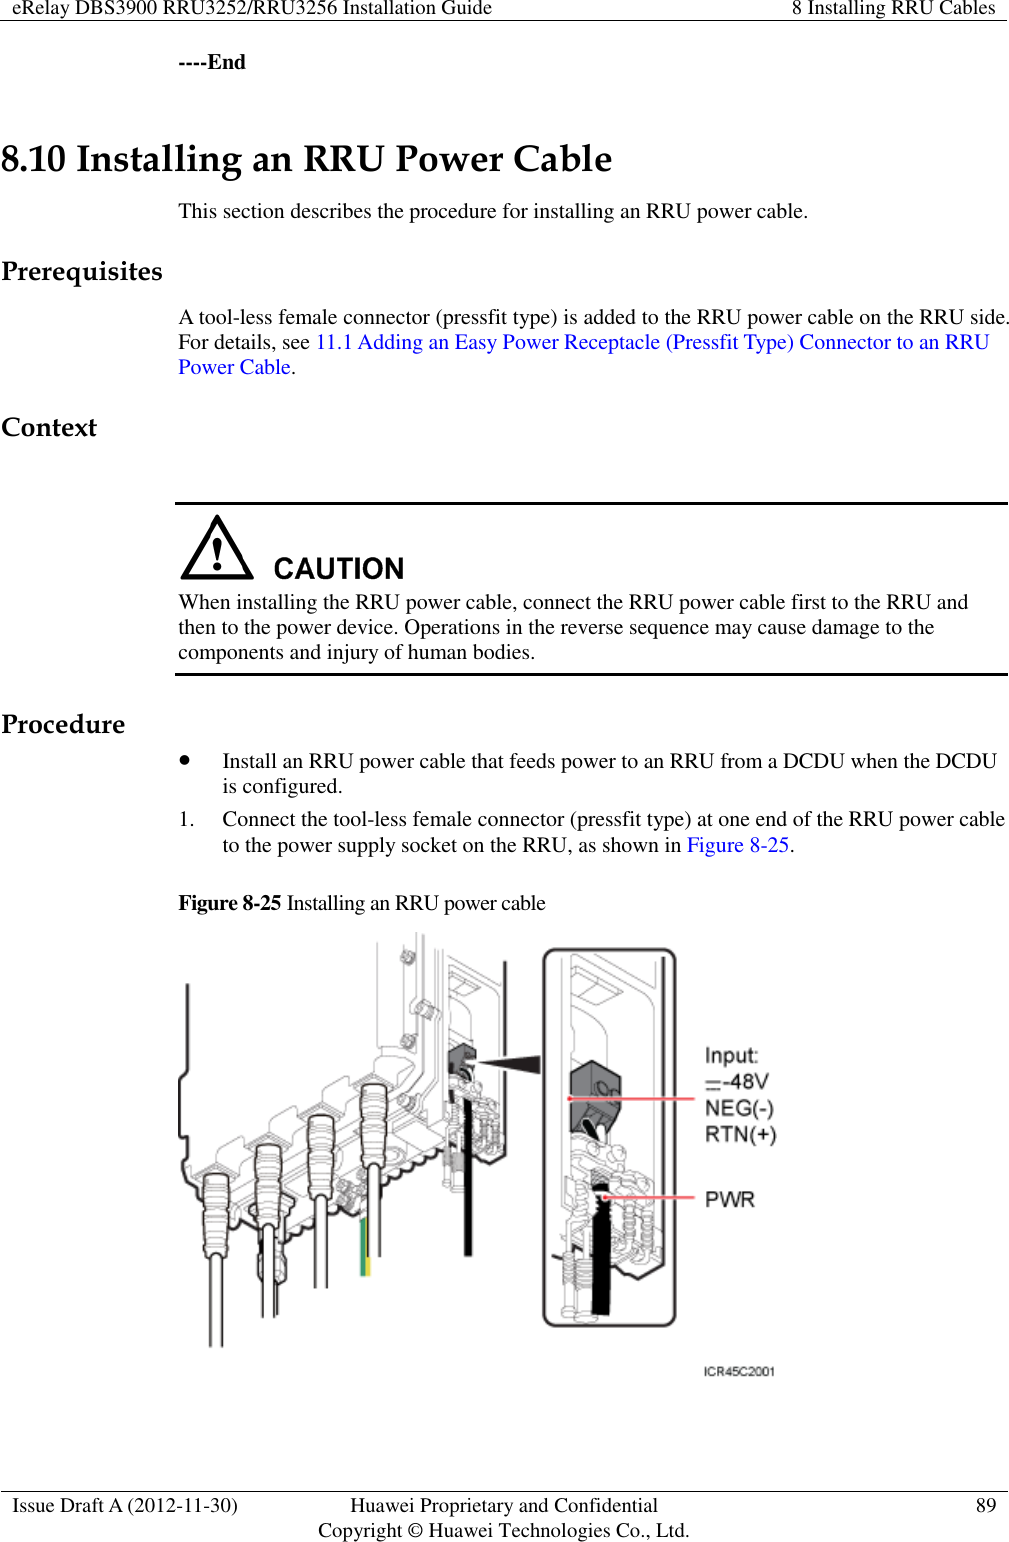 eRelay DBS3900 RRU3252/RRU3256 Installation Guide 8 Installing RRU Cables  Issue Draft A (2012-11-30) Huawei Proprietary and Confidential                                     Copyright © Huawei Technologies Co., Ltd. 89  ----End 8.10 Installing an RRU Power Cable This section describes the procedure for installing an RRU power cable. Prerequisites A tool-less female connector (pressfit type) is added to the RRU power cable on the RRU side. For details, see 11.1 Adding an Easy Power Receptacle (Pressfit Type) Connector to an RRU Power Cable. Context   When installing the RRU power cable, connect the RRU power cable first to the RRU and then to the power device. Operations in the reverse sequence may cause damage to the components and injury of human bodies. Procedure  Install an RRU power cable that feeds power to an RRU from a DCDU when the DCDU is configured. 1. Connect the tool-less female connector (pressfit type) at one end of the RRU power cable to the power supply socket on the RRU, as shown in Figure 8-25.   Figure 8-25 Installing an RRU power cable   